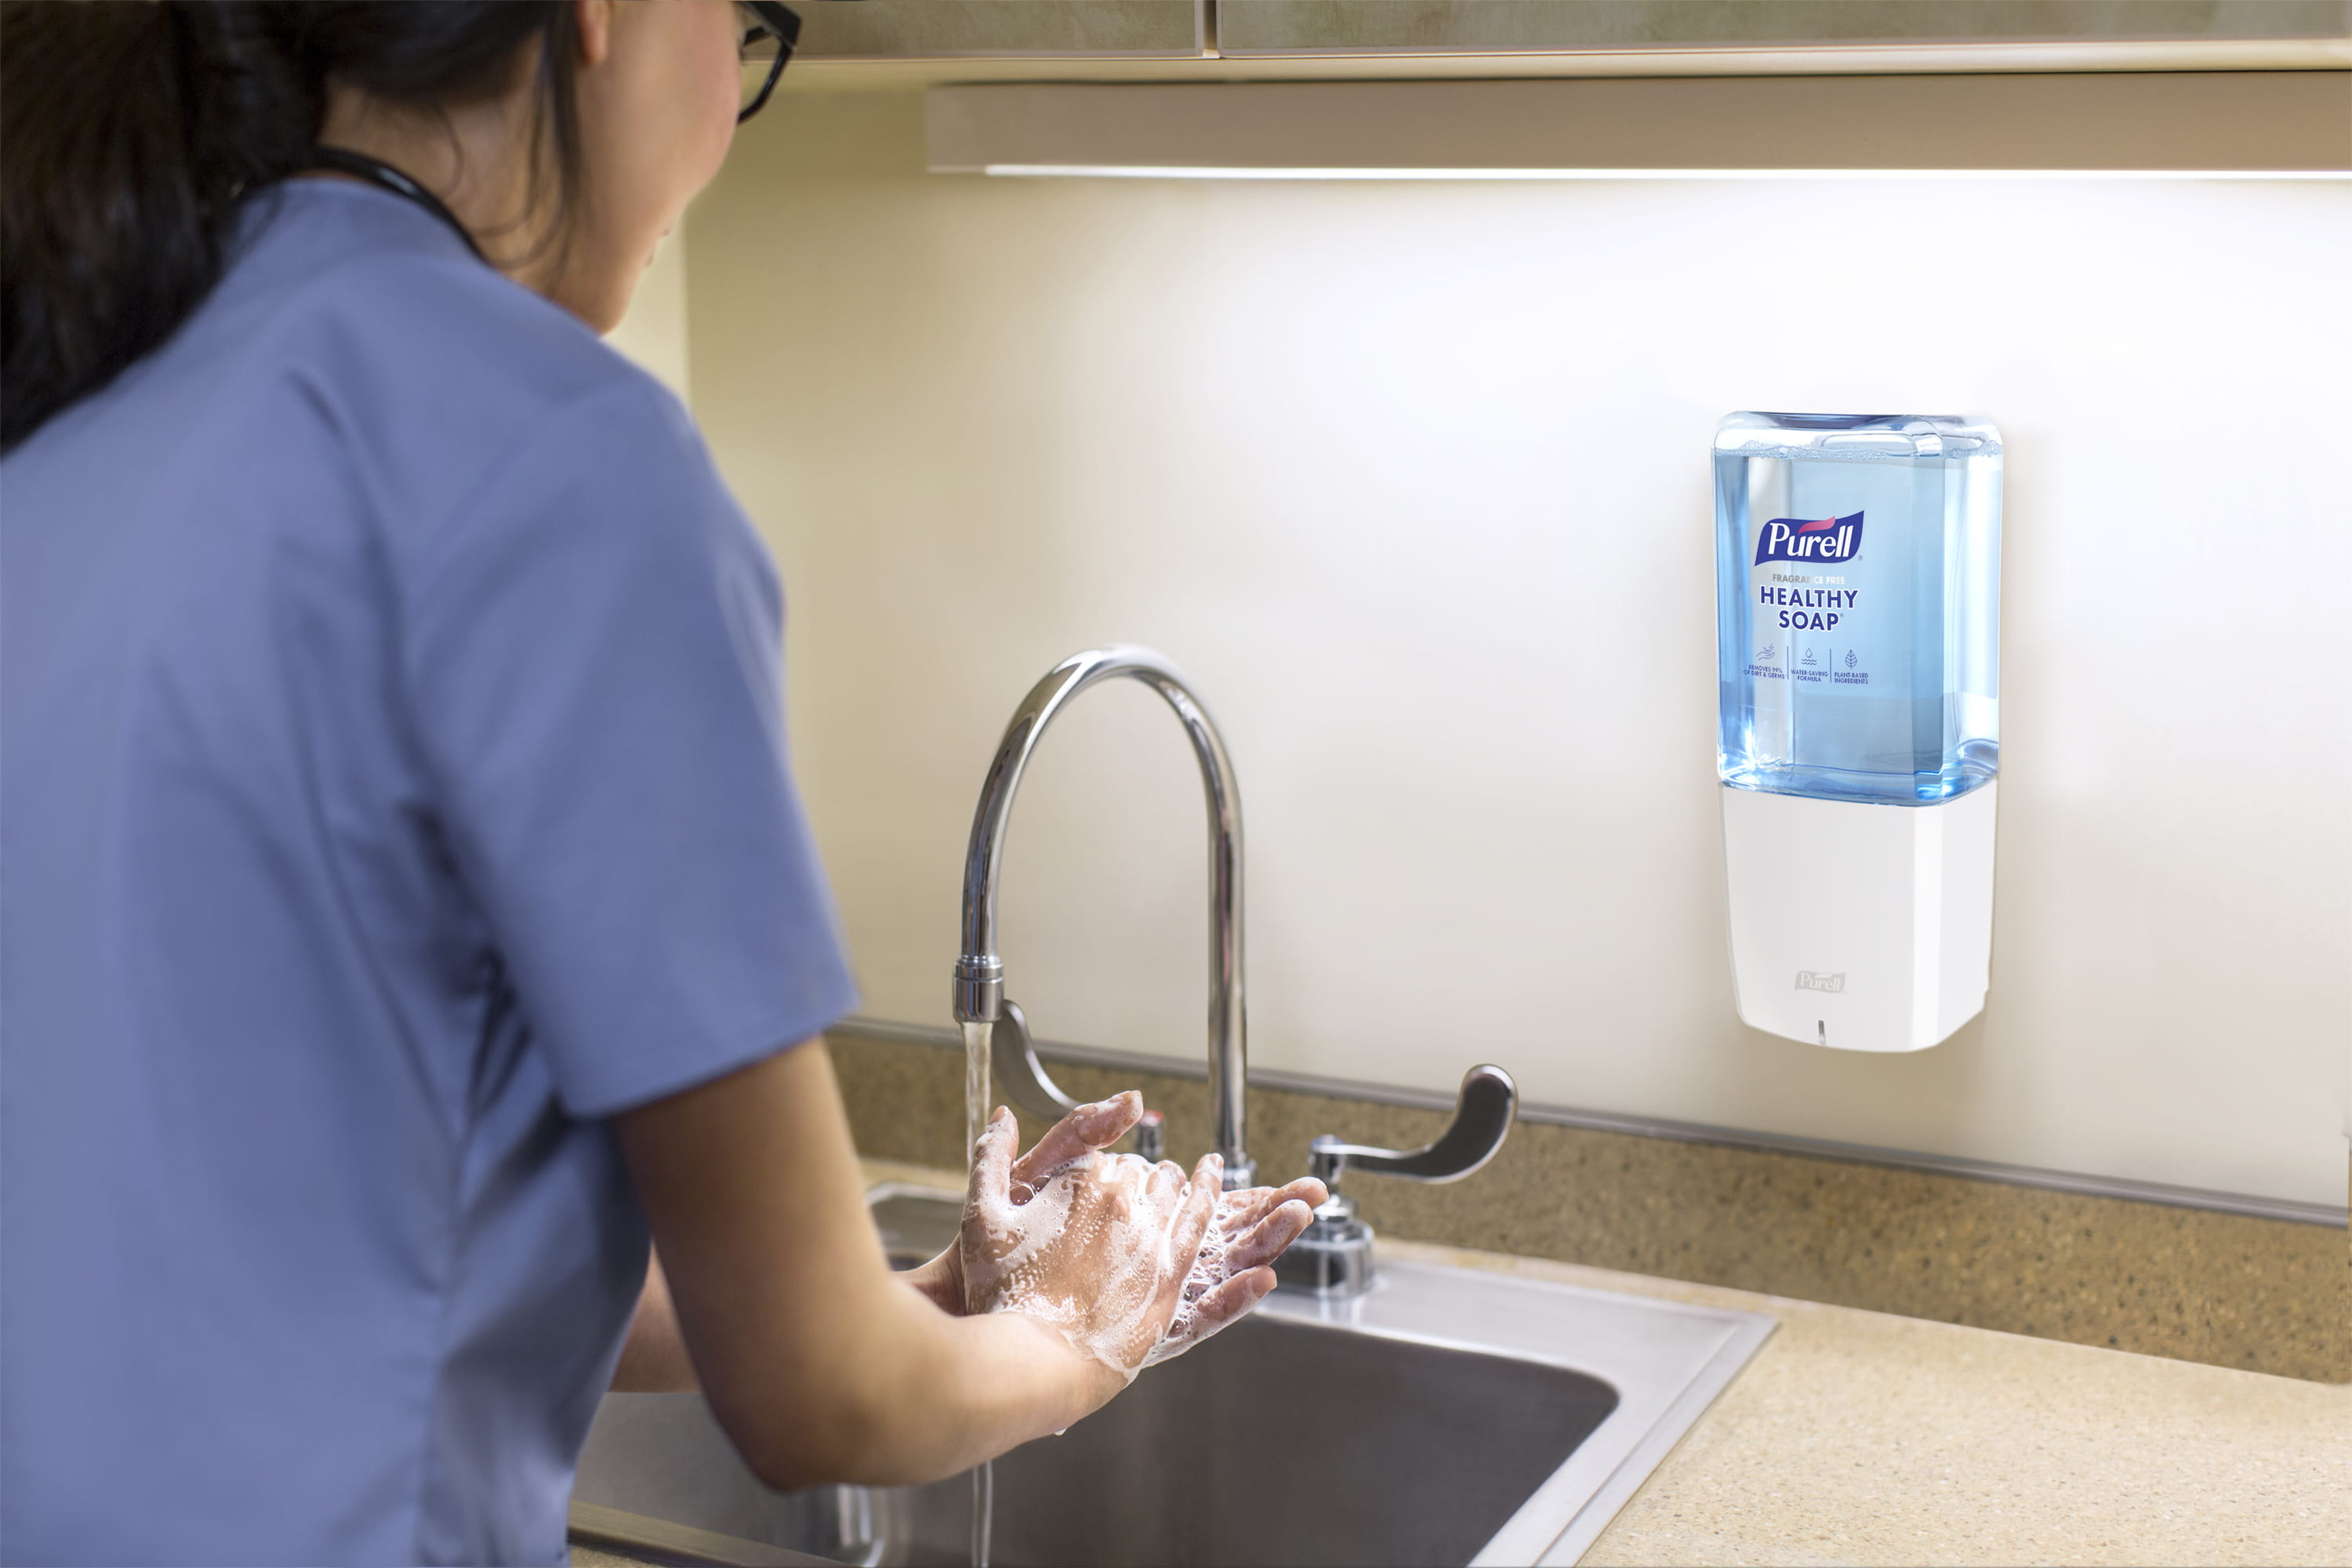 A person washes thier hands at a sink with a mounted PURELLL ES10 dispenser and Heathy Soap.